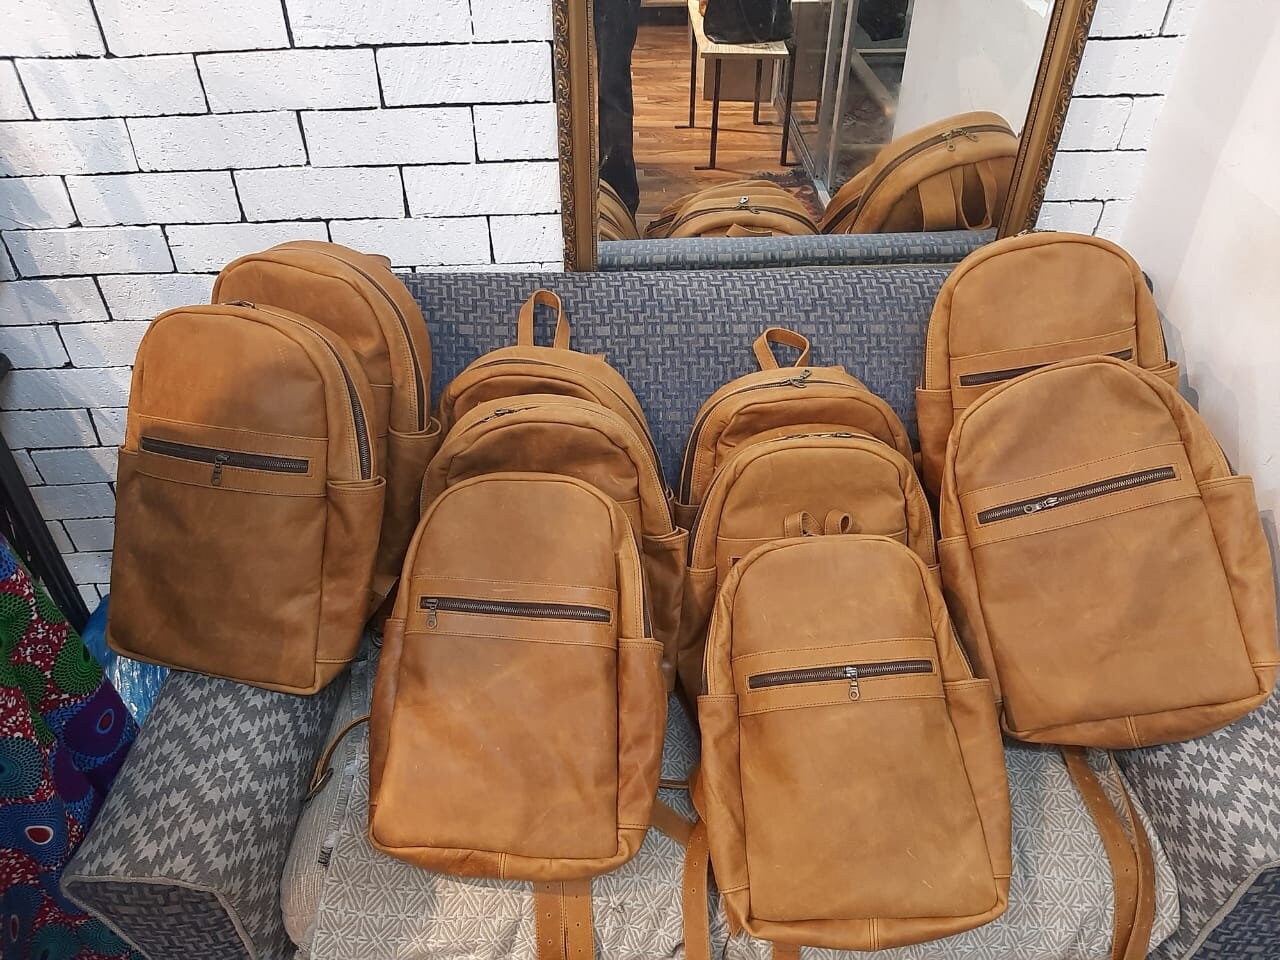 Beautifully crafted Genuine Leather Backpack - Handcrafted in South Africa